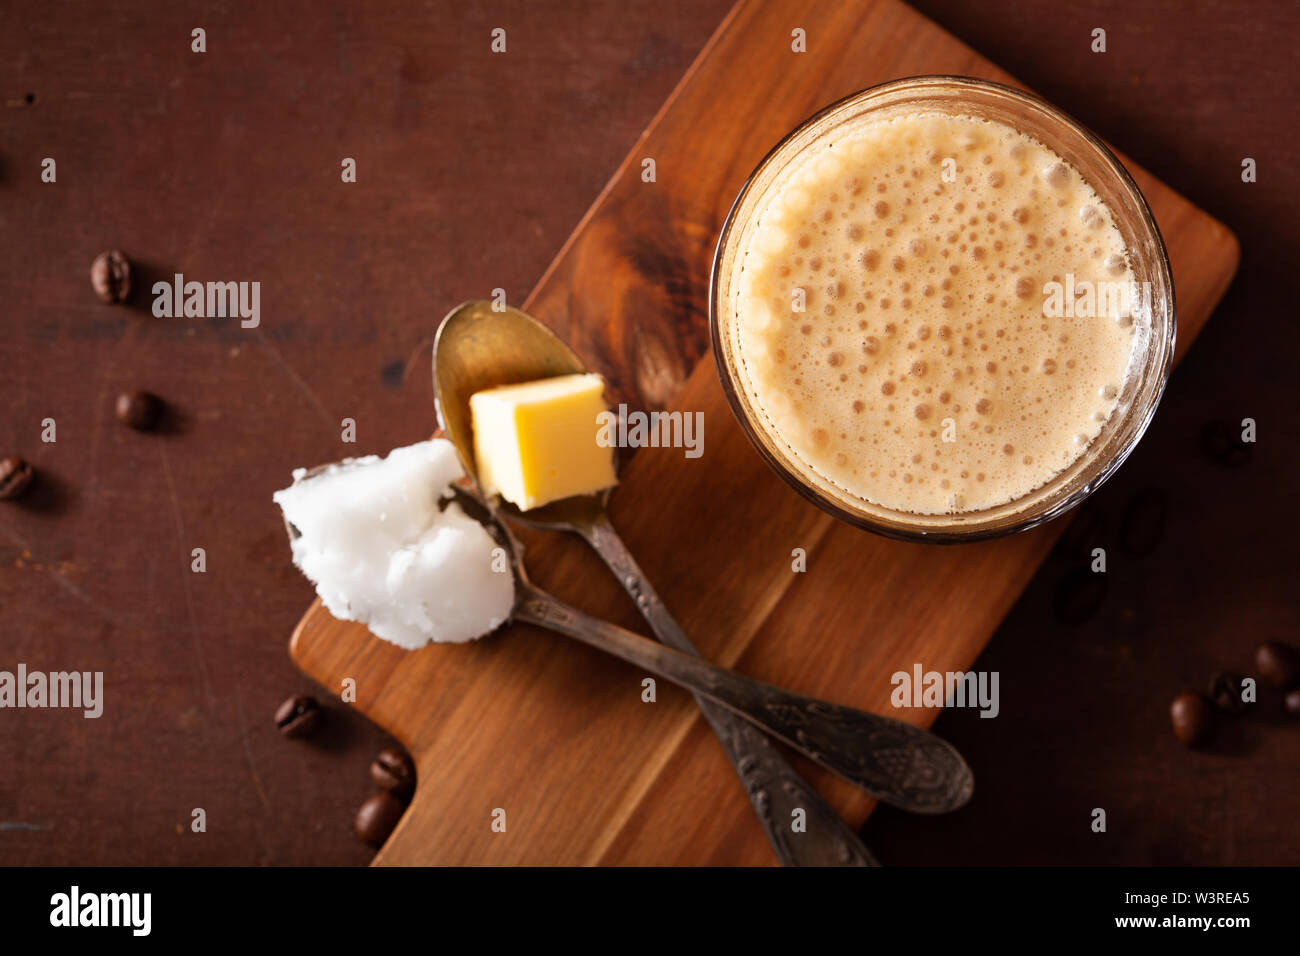 bulletproof coffee, keto paleo drink blended with butter and coconut oil Stock Photo